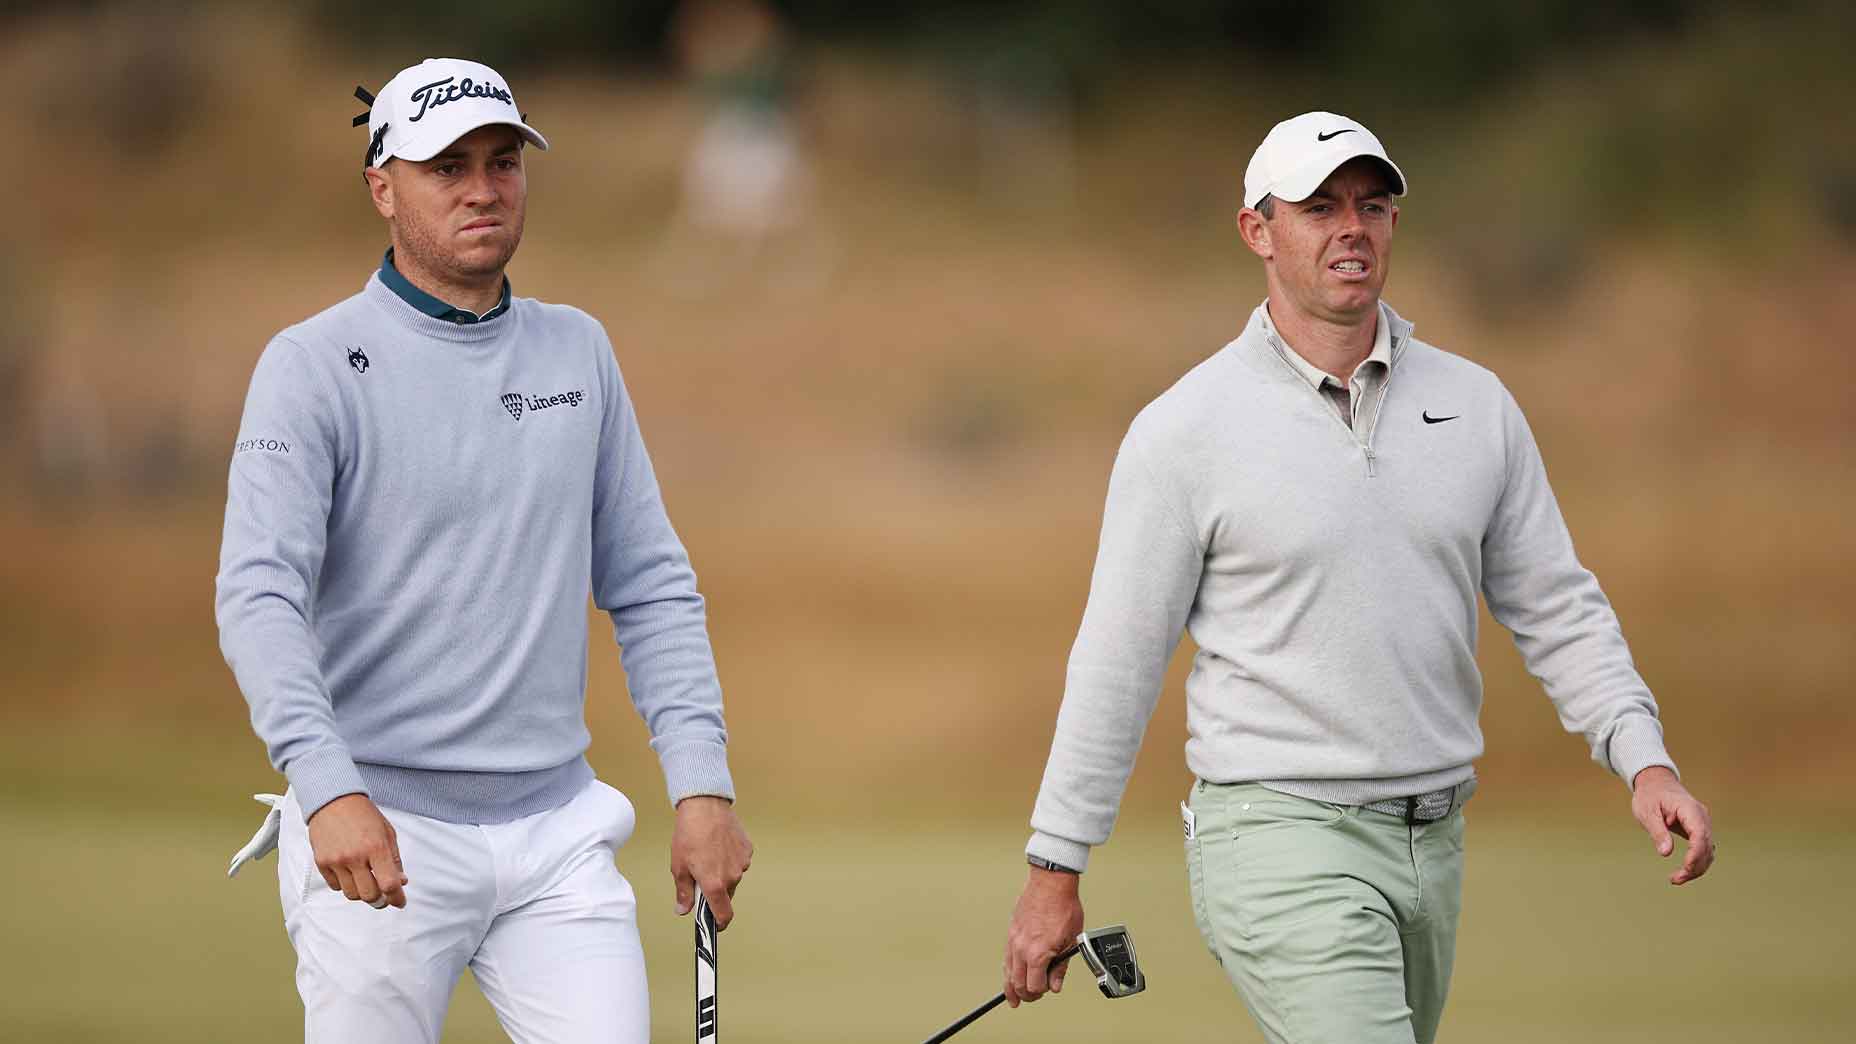 'No brainer': Rory McIlroy defends Justin Thomas Ryder Cup pick